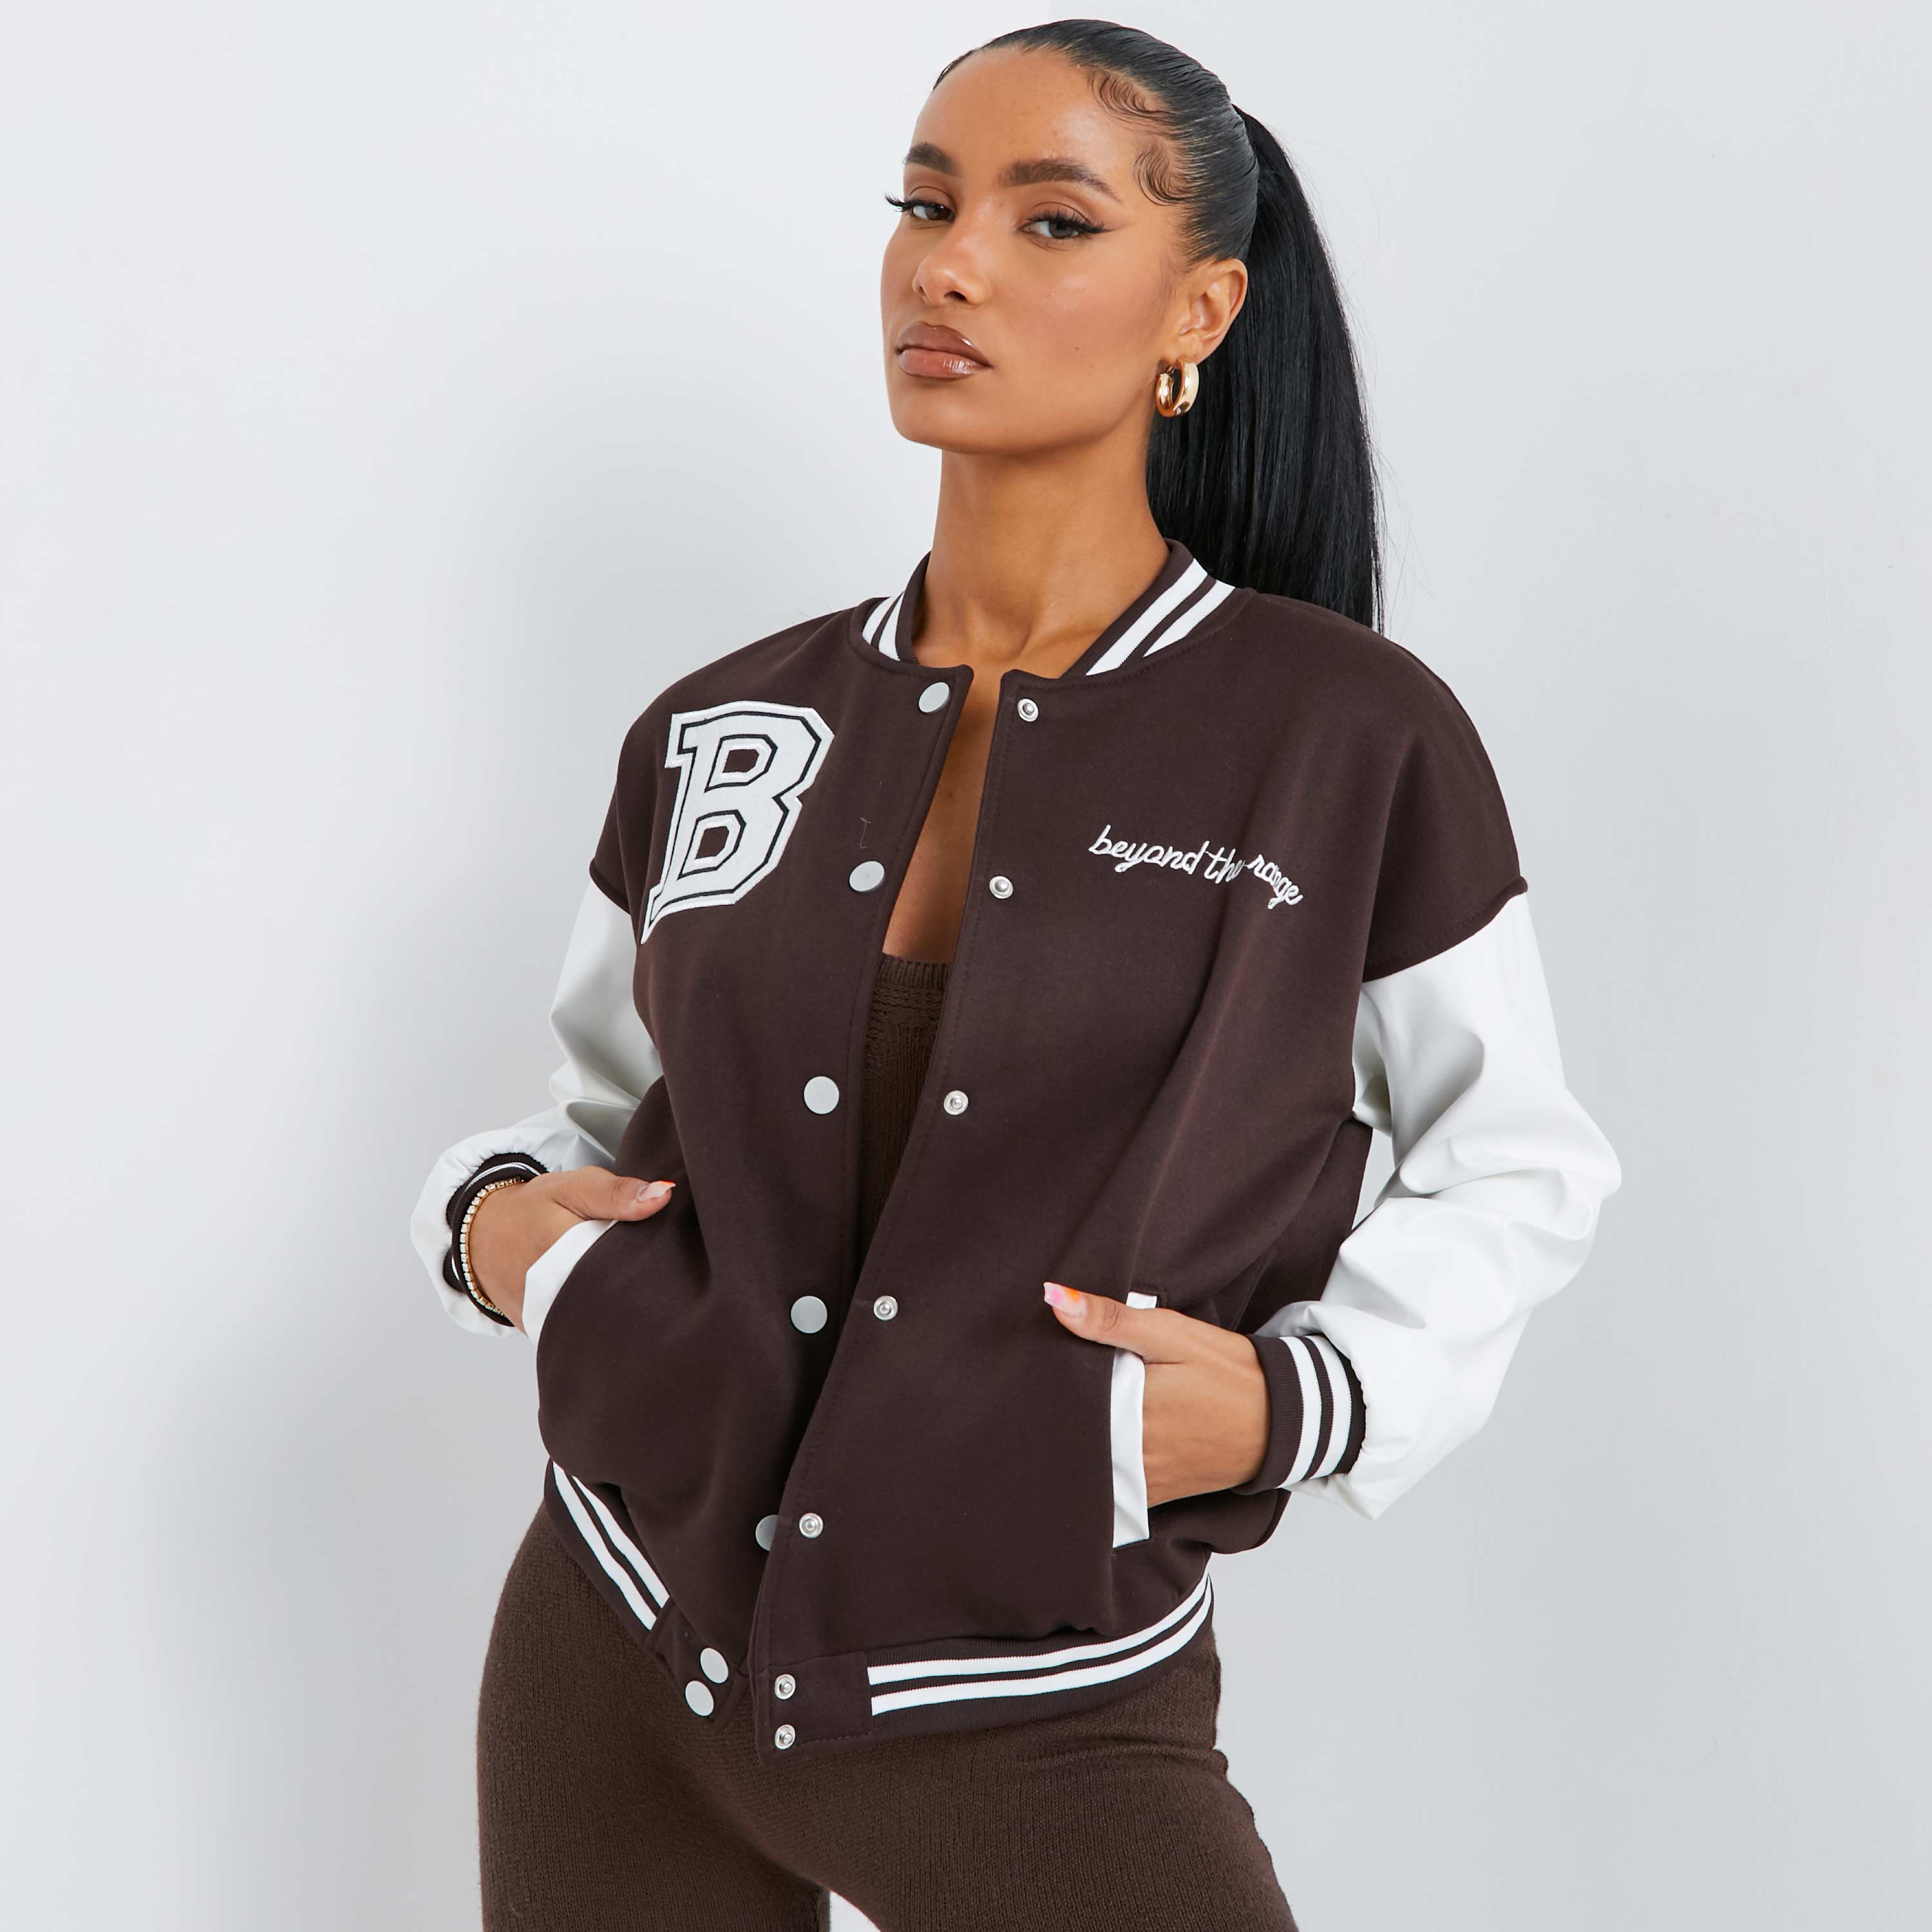 brown varsity jacket outfit girl